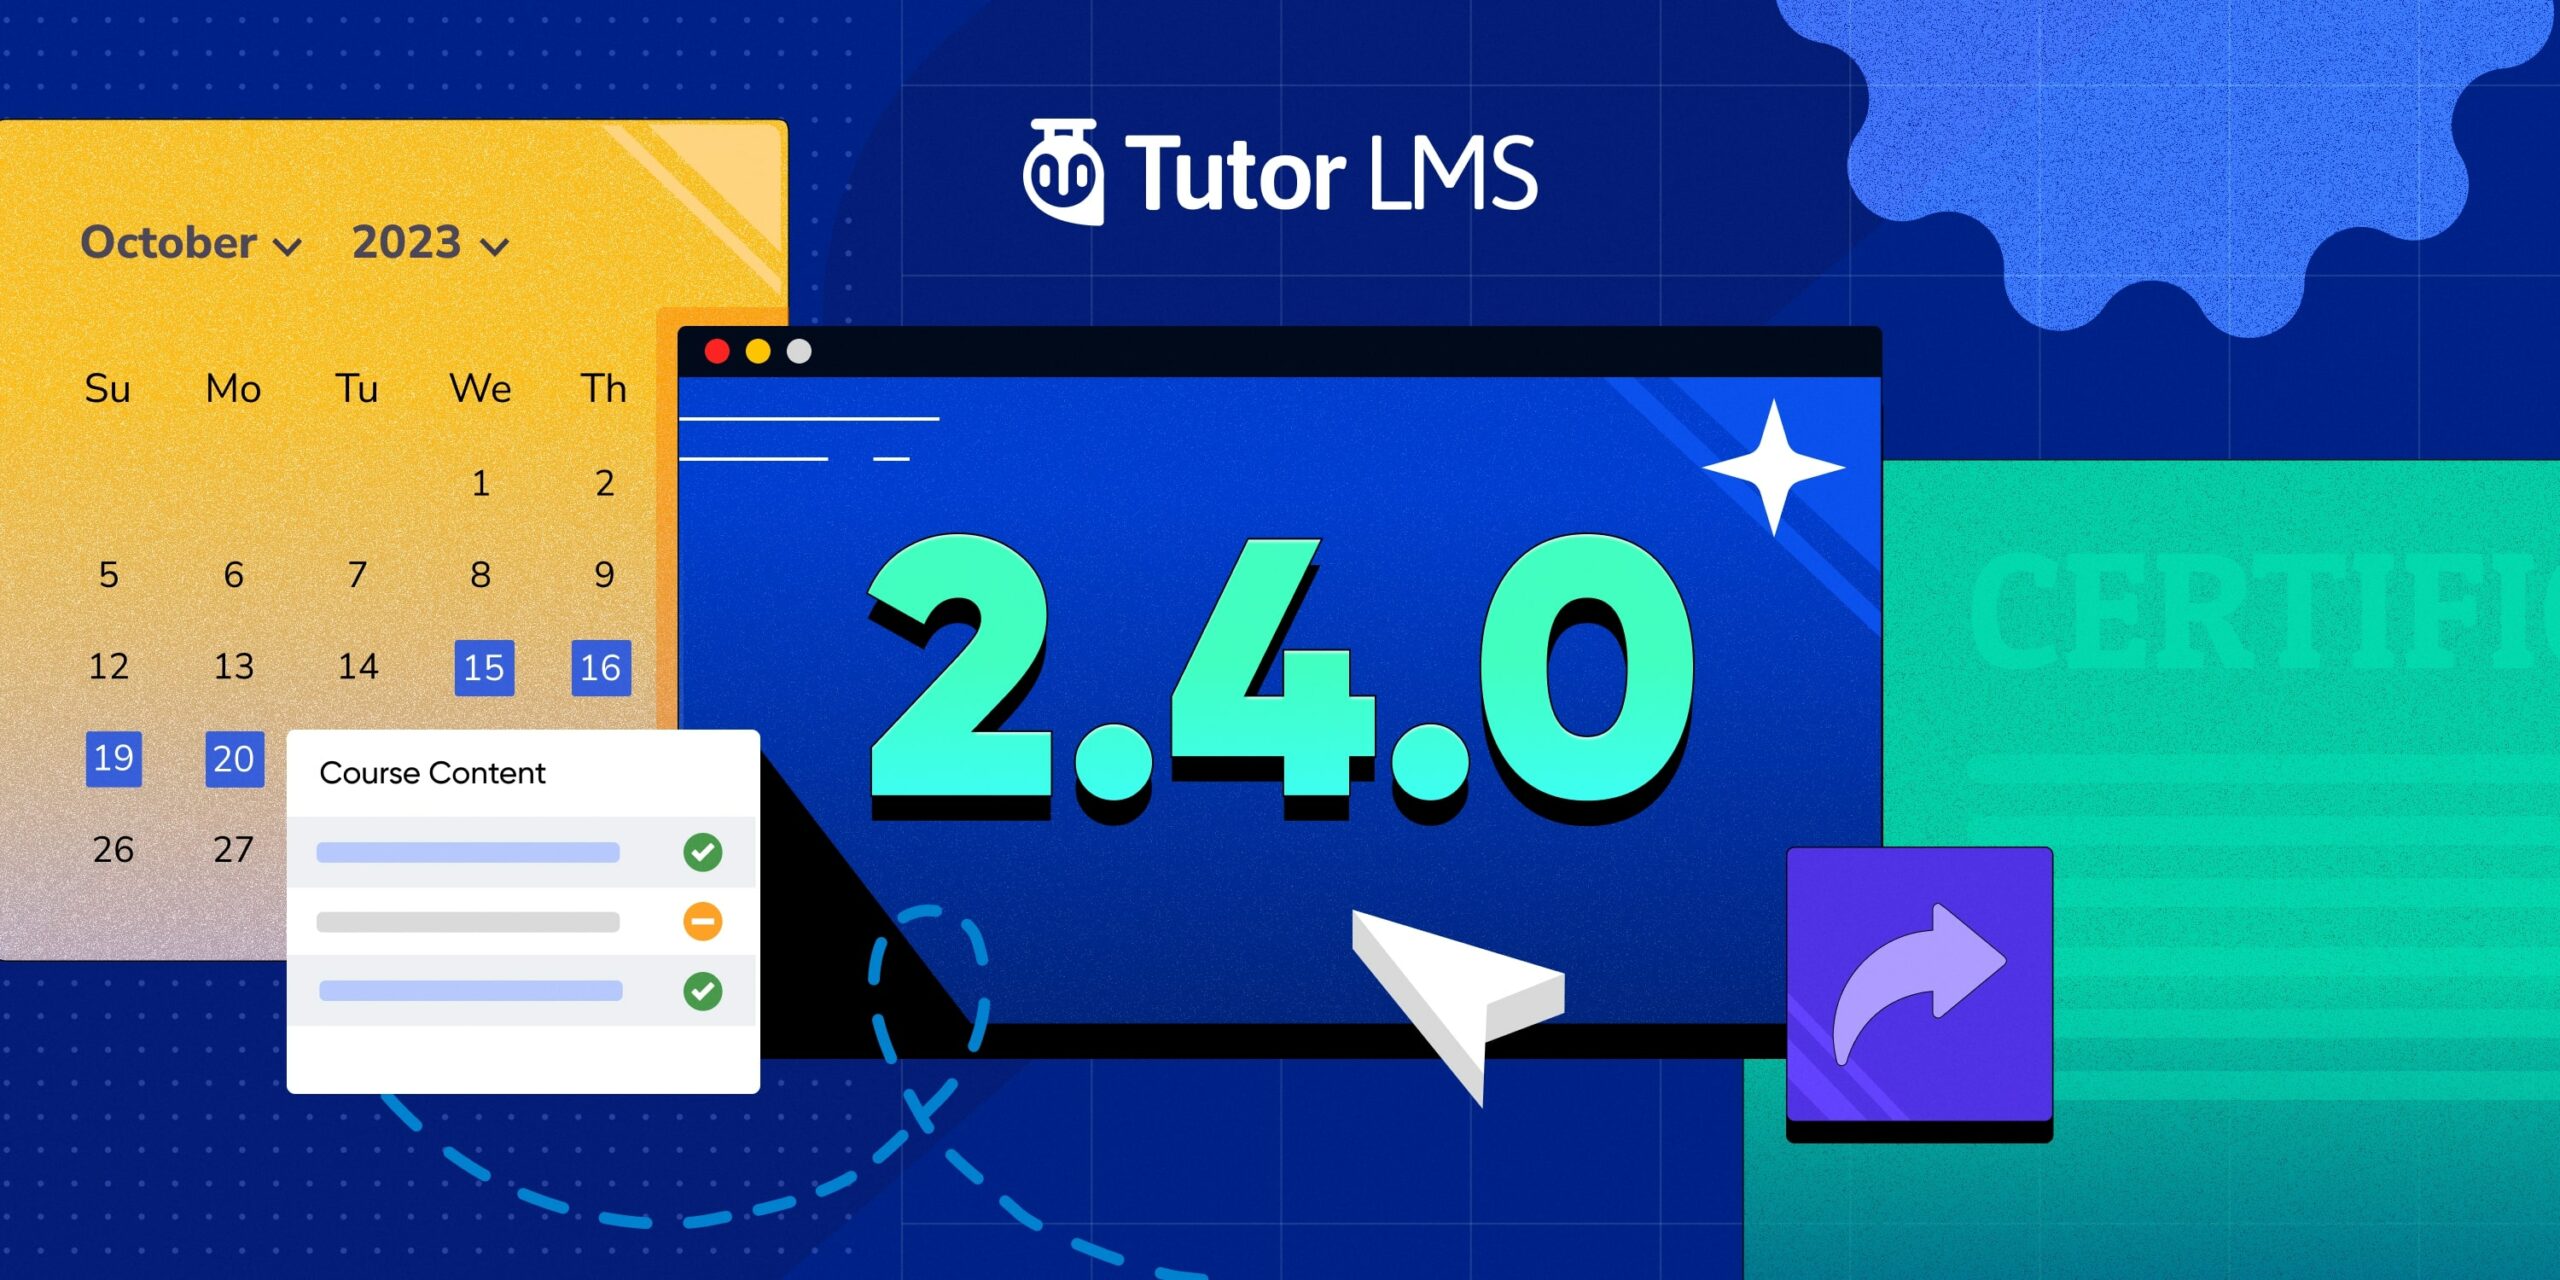 Tutor LMS v2.4.0: Brings Enhancements to Learning Mode, Tutor Calendar, Certificates and More